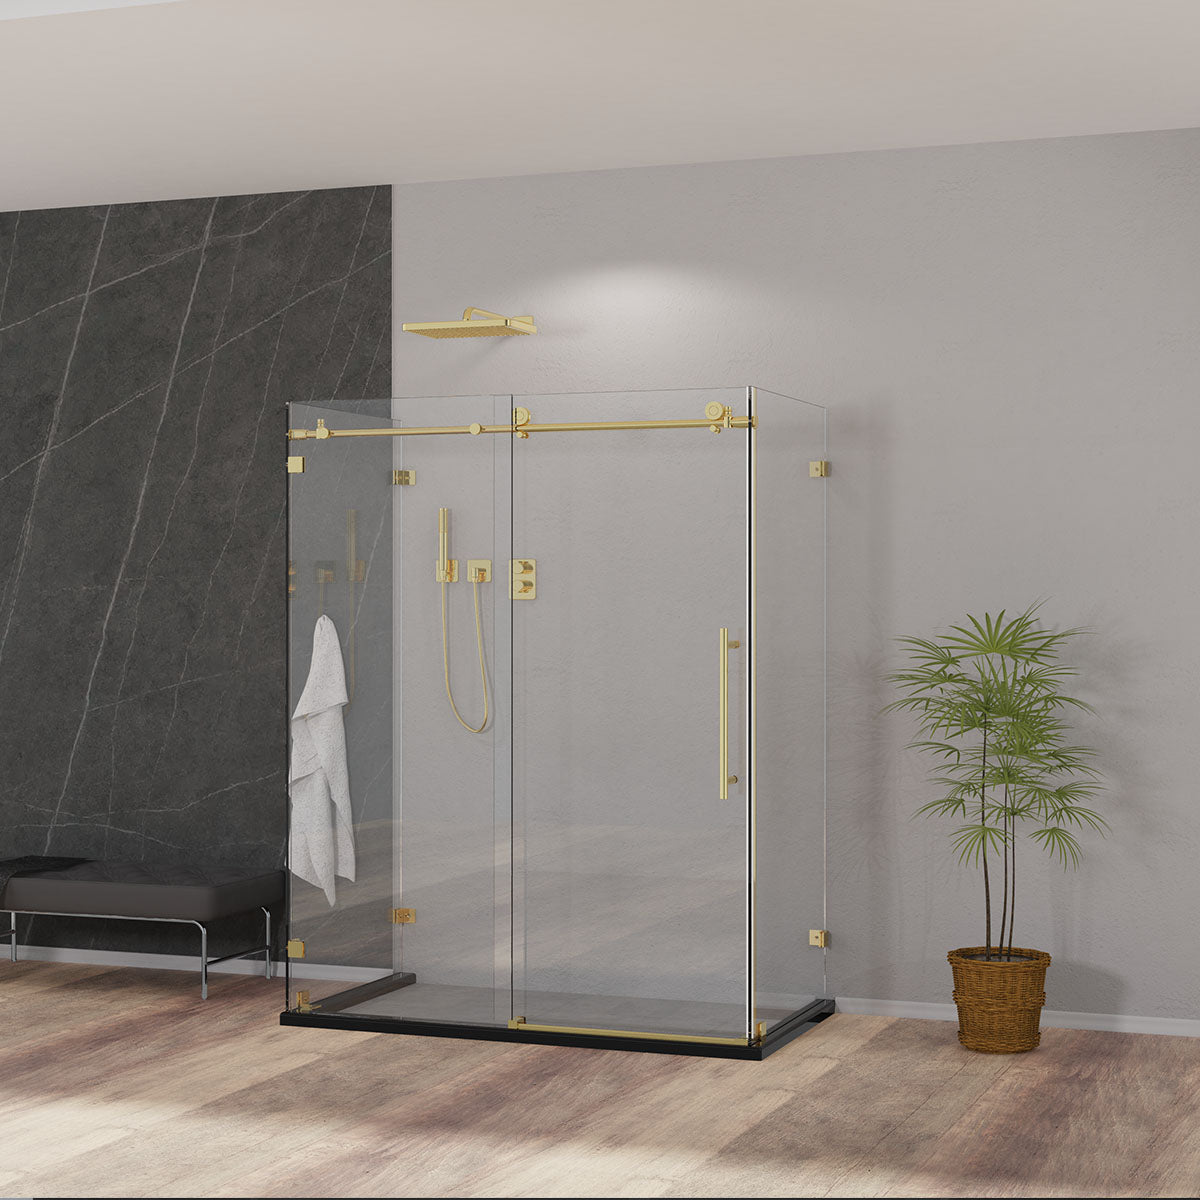 Custom U-Shape, BH01 Frameless Single Sliding Shower Door with Two Return Panels 46"-72" W, RP 28" 30" - 48"D x 76" H (3/8" Thickness) (Chrome, Brushed Nickel, Matte Black & Brushed Gold) in stocks ready to be delivery - iStyle Bath